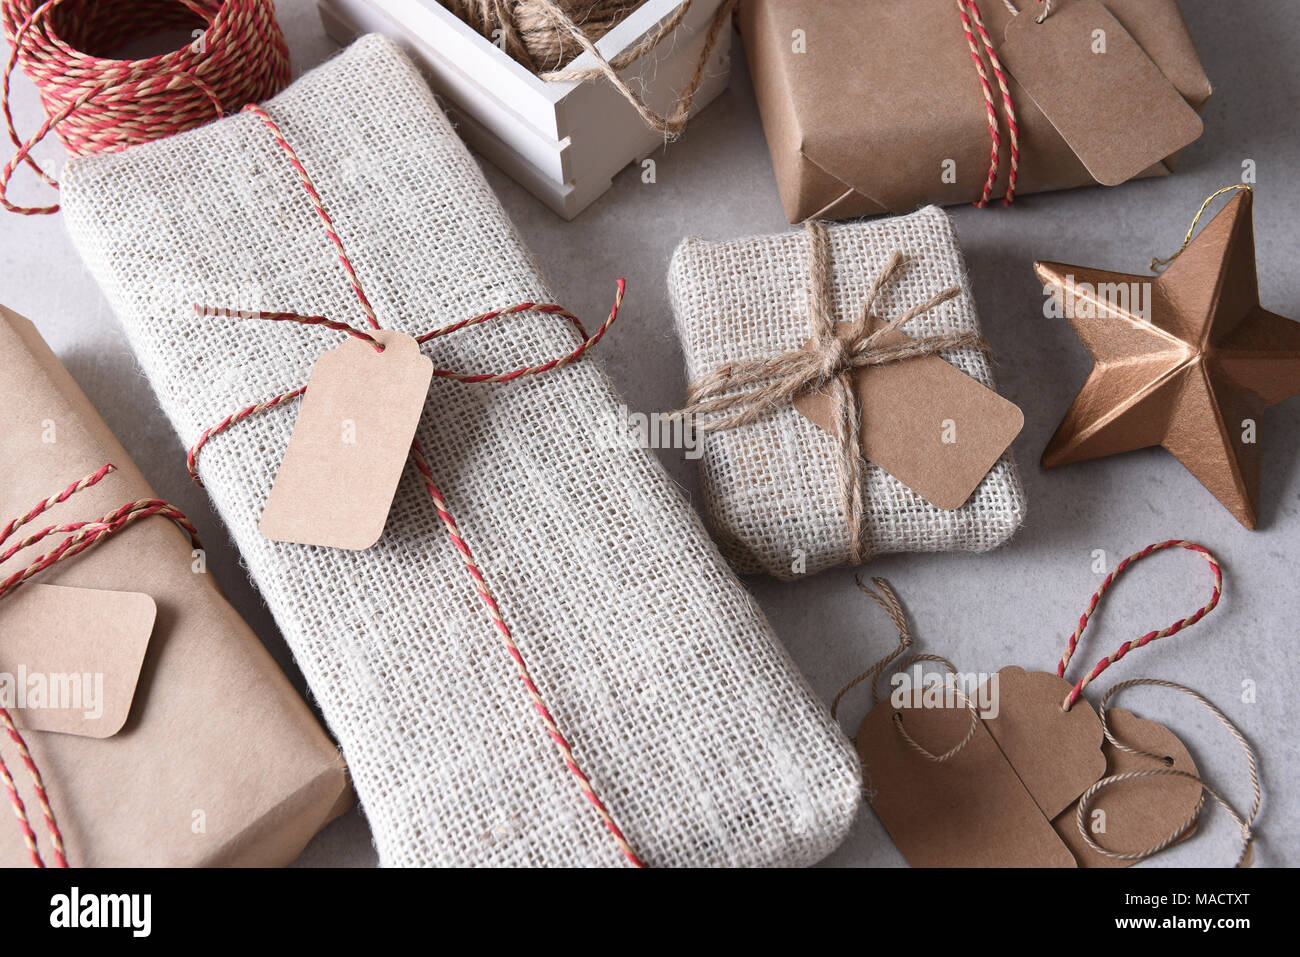 Wrapping Christmas Presents. High angle shot of a group of fabric and paper wrapped presents. Stock Photo